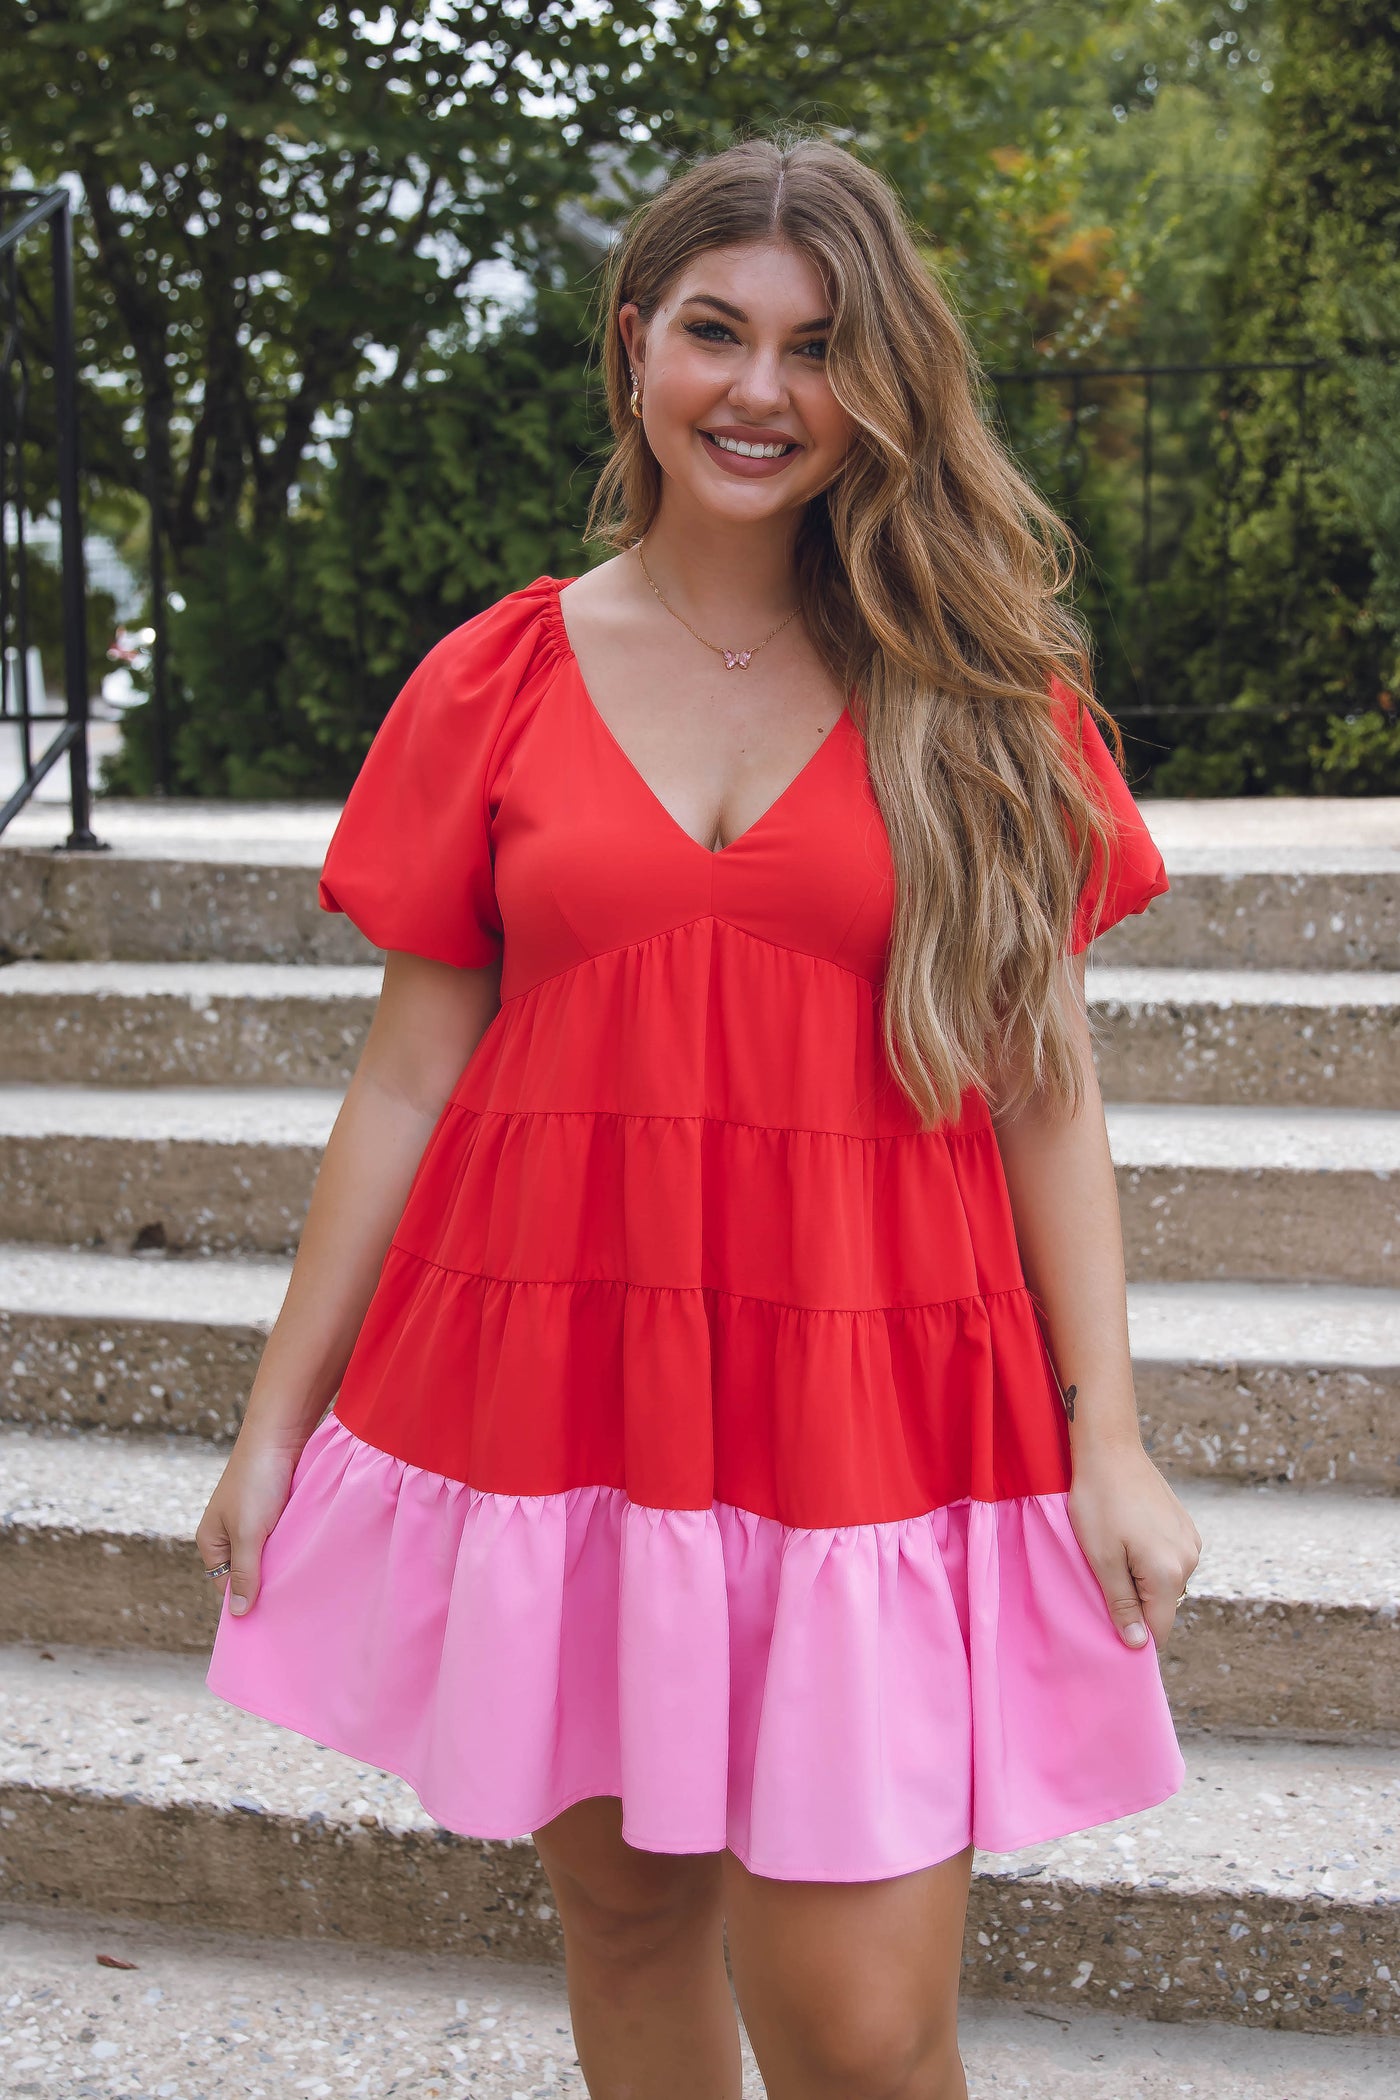 Fun Red And Pink Dress- Preppy Color Block Dress- Red Dress- Dresses with Puff Sleeves